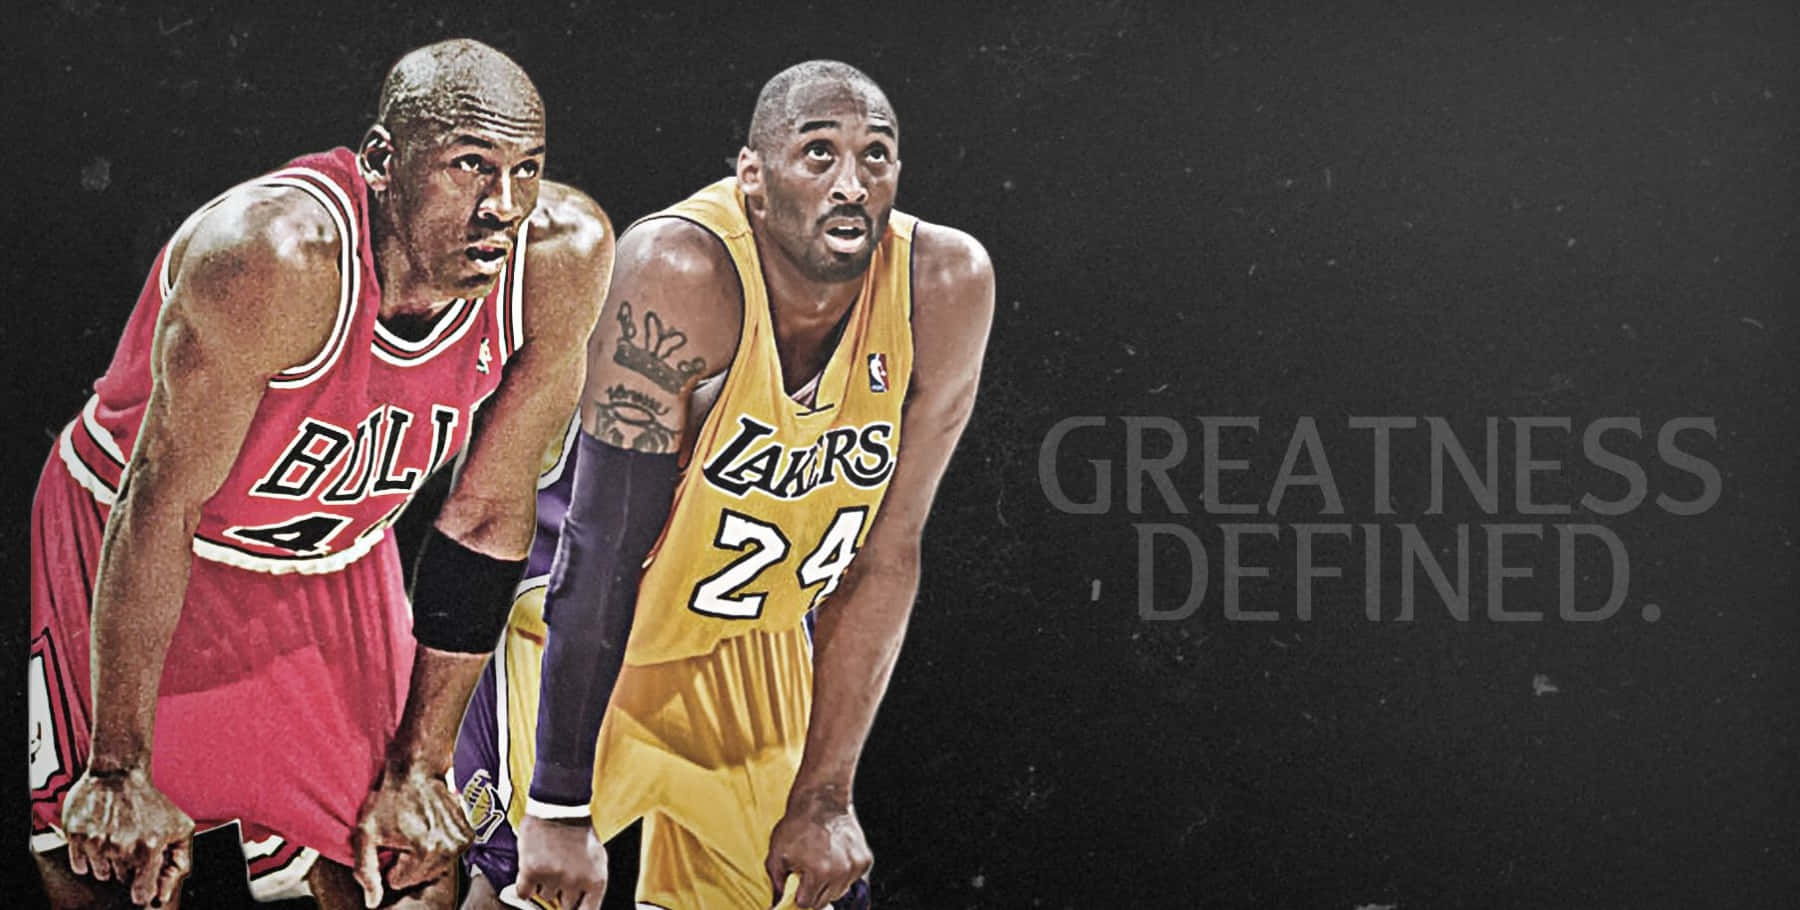 Two of the greatest athletes of all time, Kobe Bryant and Michael Jordan Wallpaper